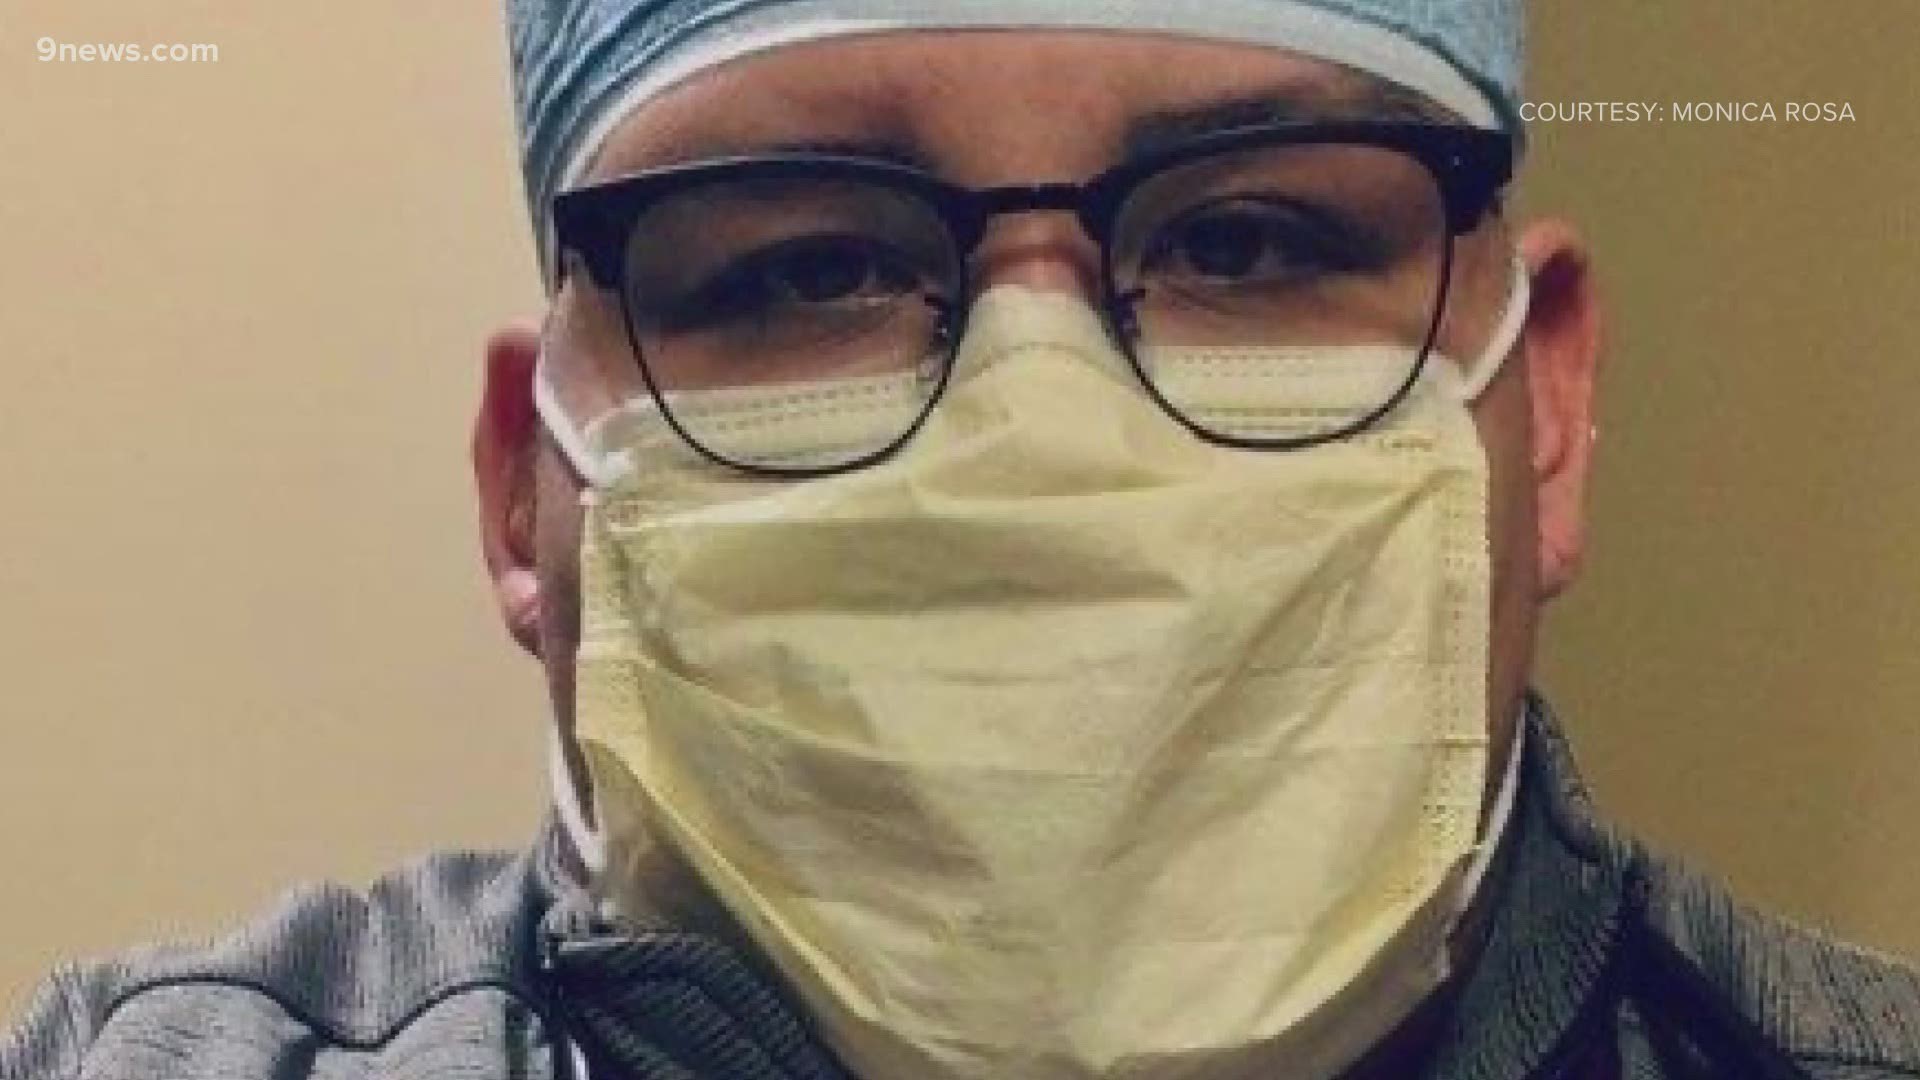 Roman Valles is a respiratory therapist based in Colorado, but spent his summer treating patients around the country. Now he has contracted the virus.